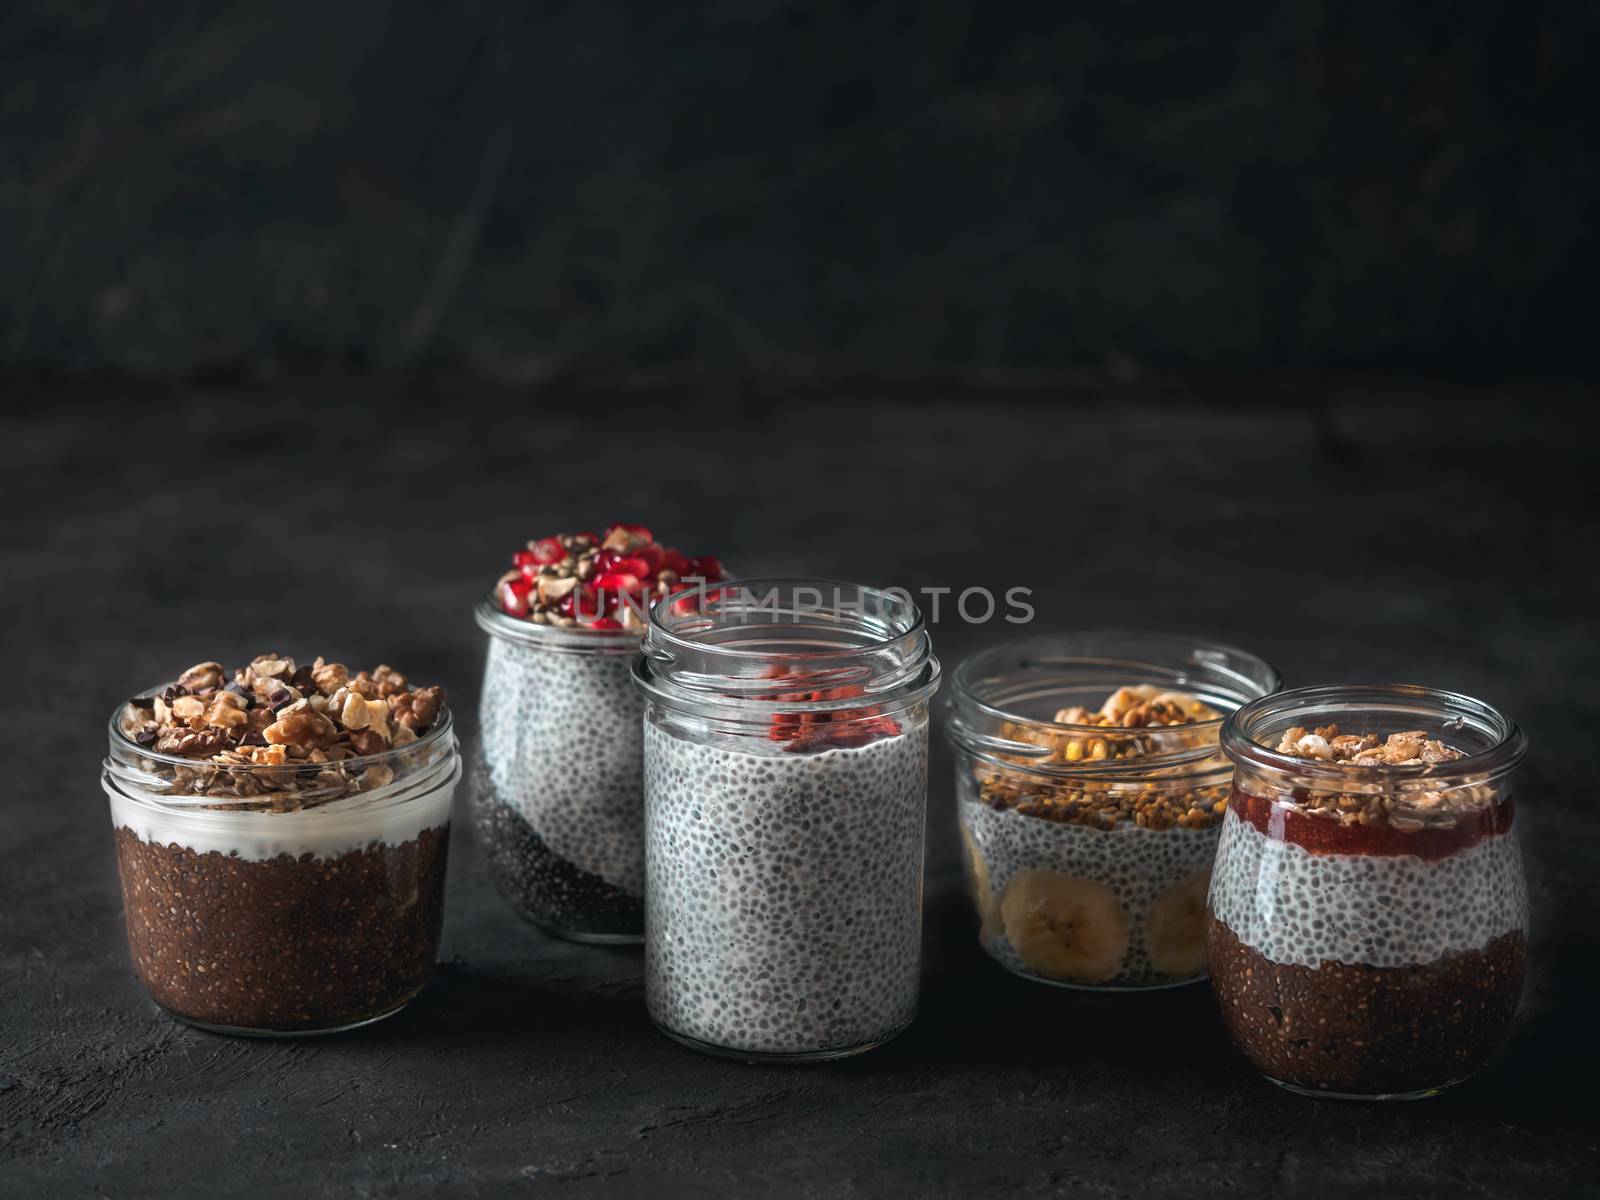 Set of chia pudding in different glass jars on dark table. Assortment of chia puding with different fruits, nuts,ingredients. Copy space for text. Superfood,detox,healthy overnight breakfast concept